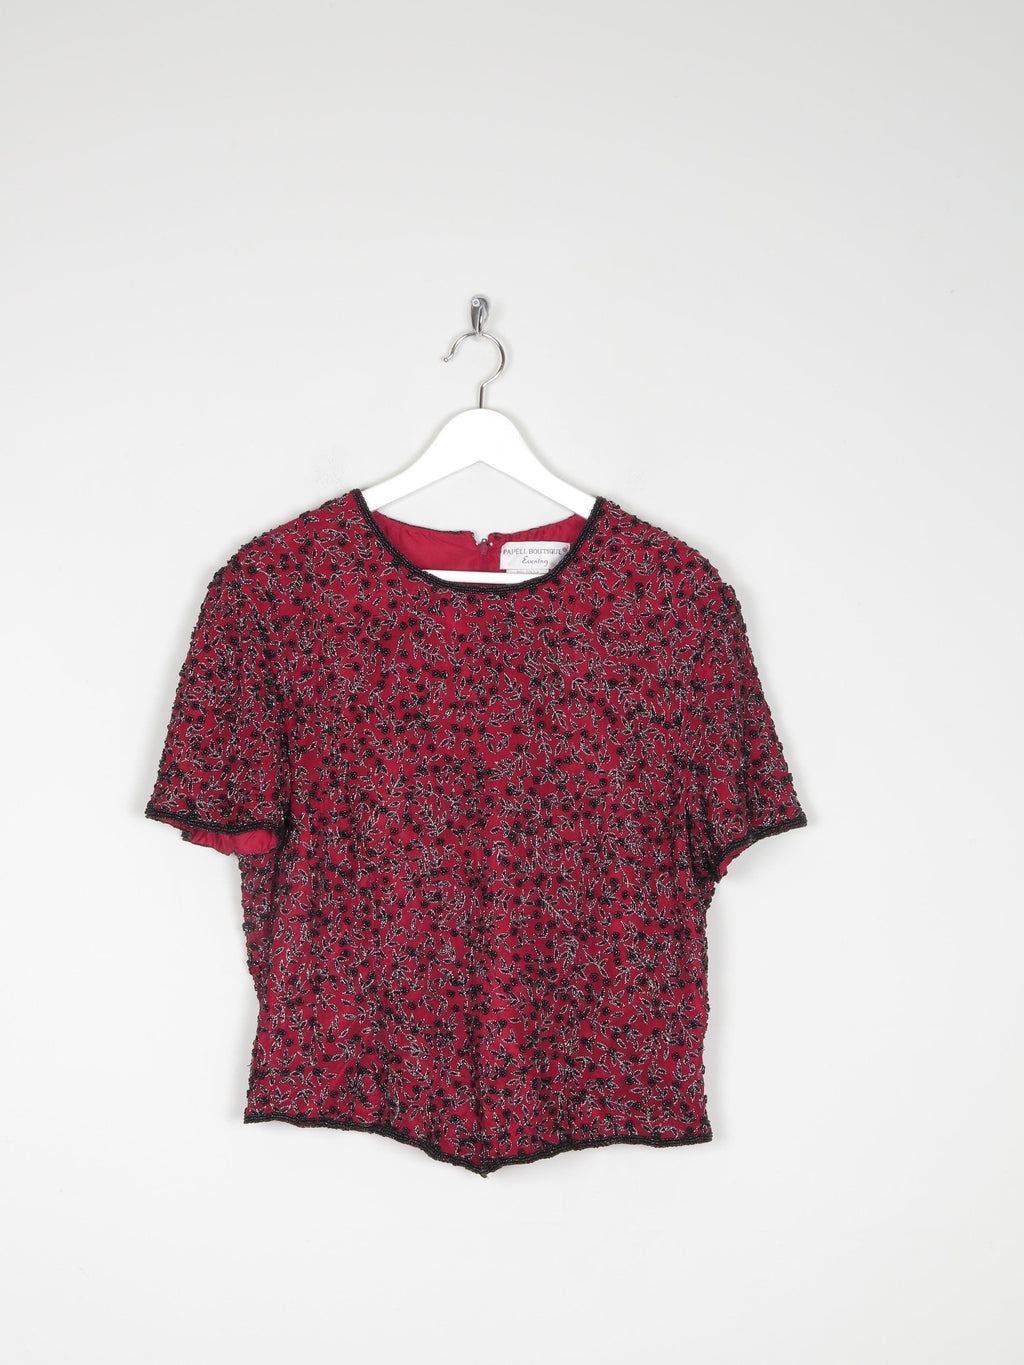 Red & Black Beaded Short Sleeved Top L - The Harlequin